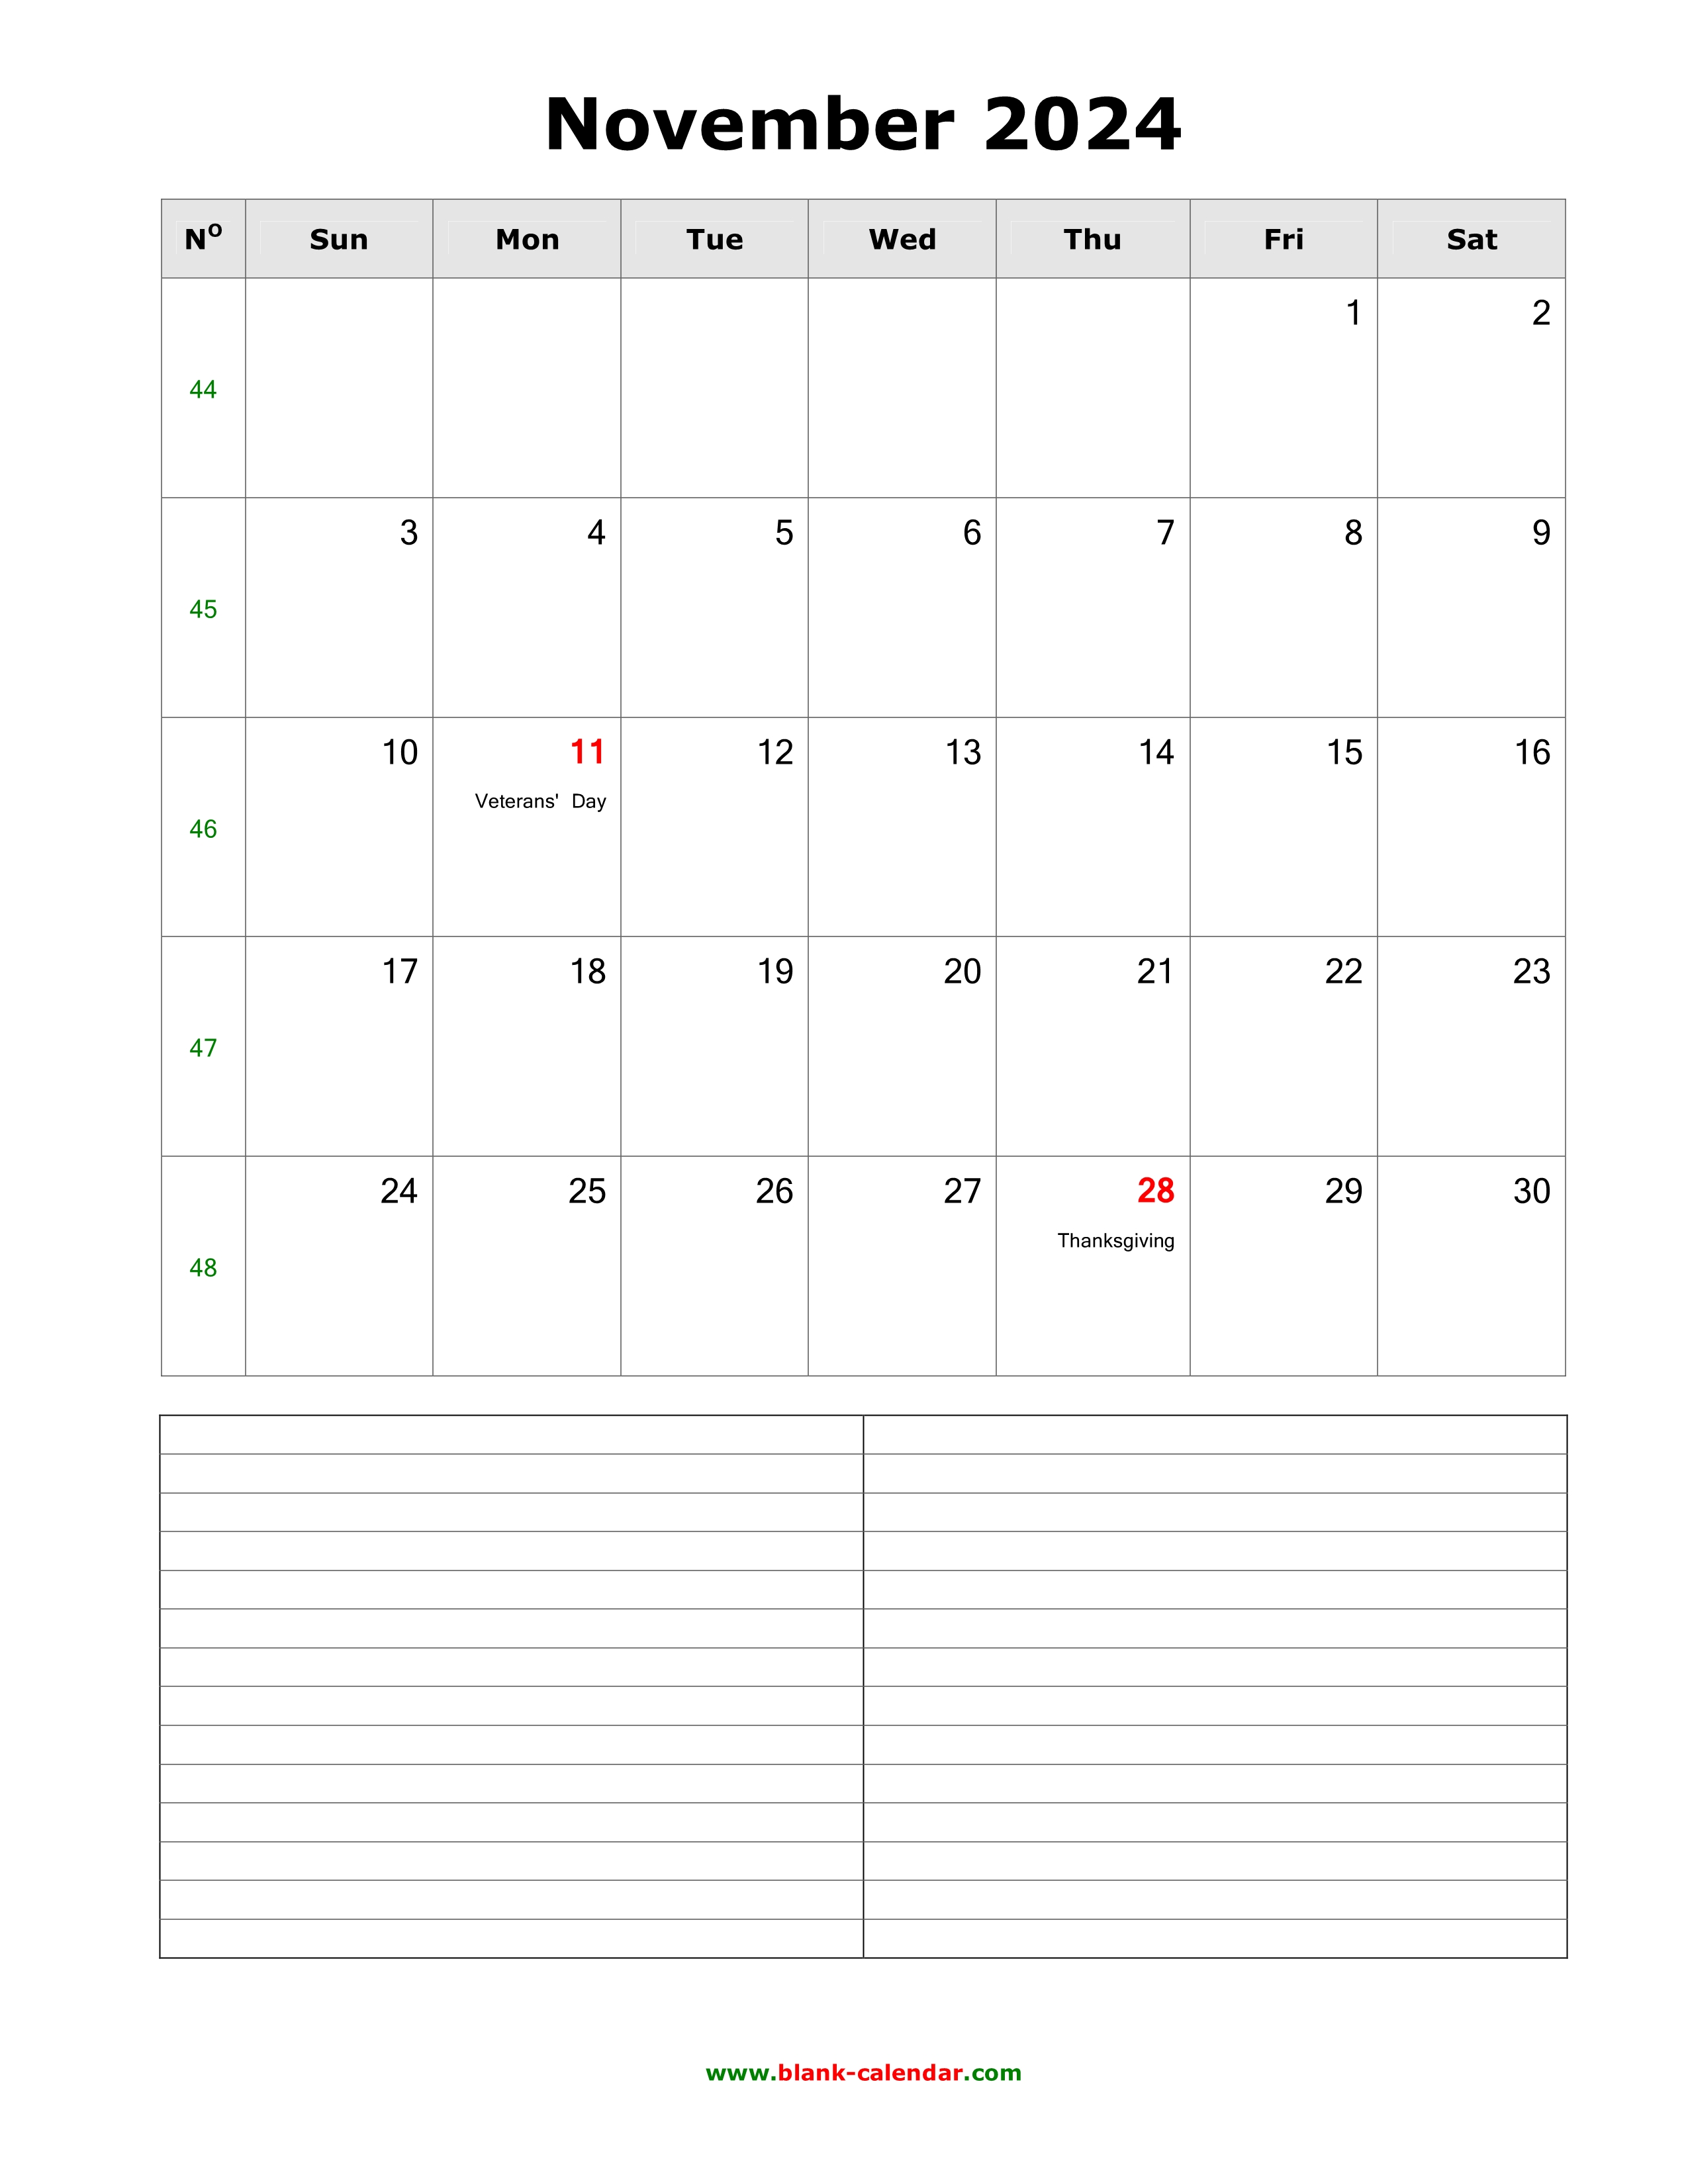 Download November 2024 Blank Calendar with Space for Notes (vertical)